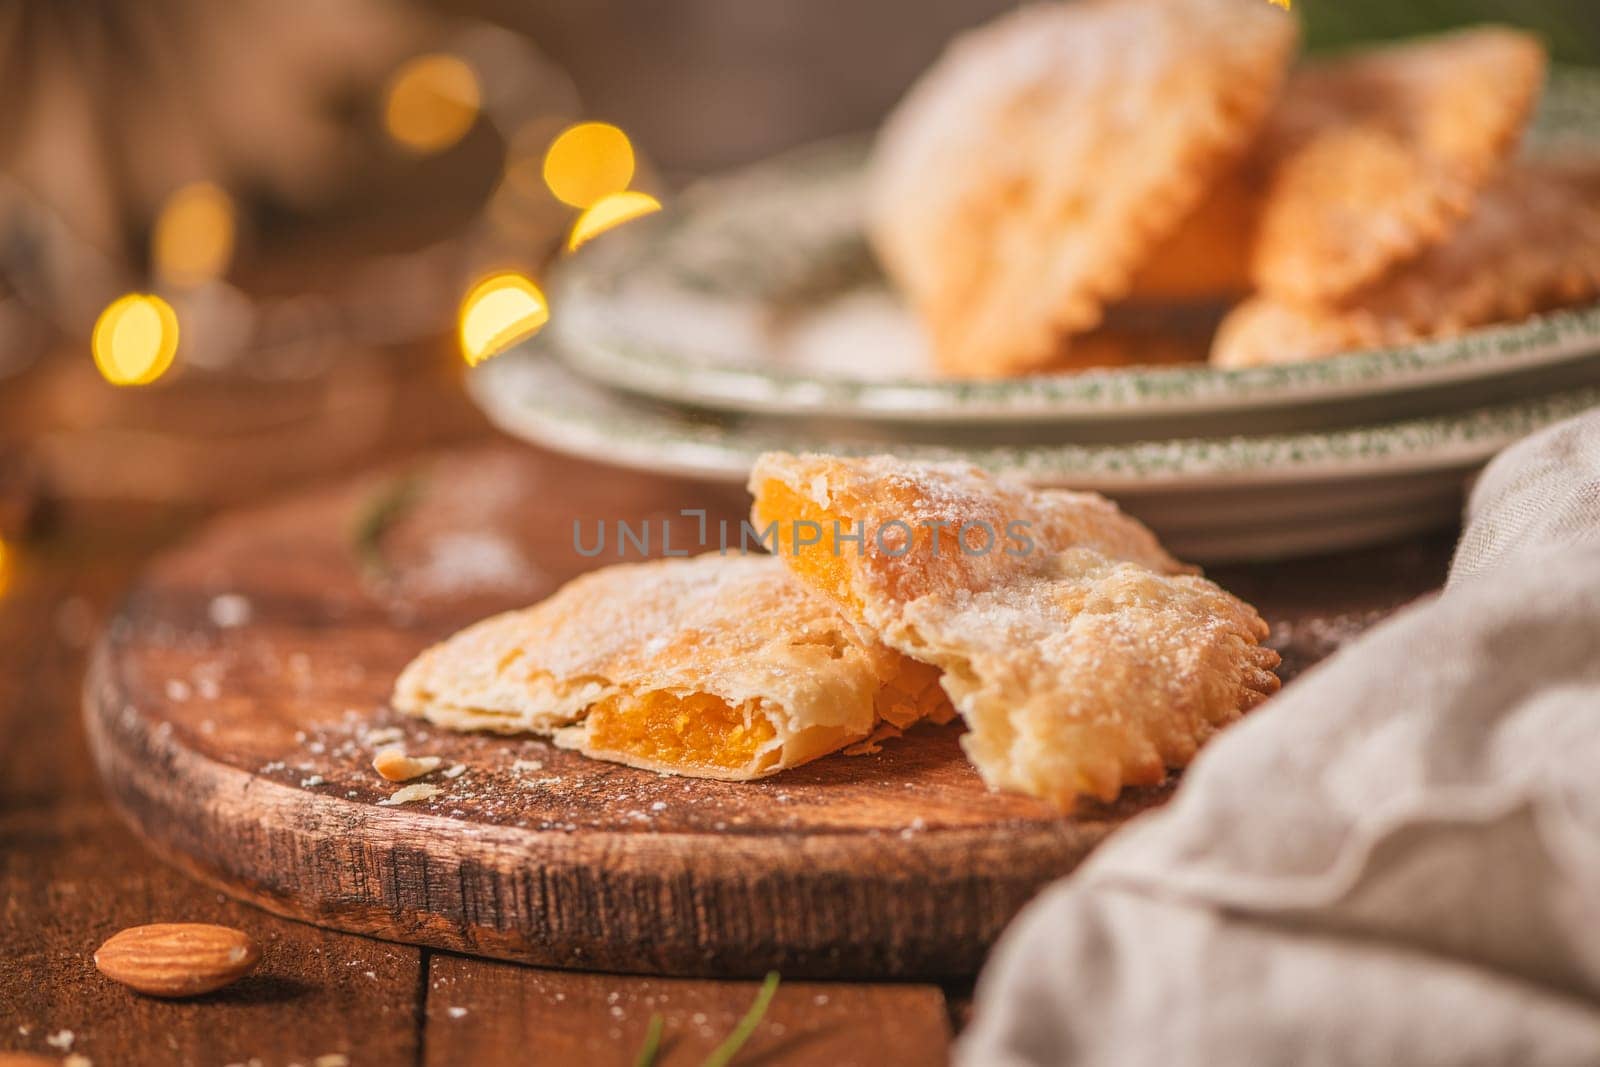 A crescent-shaped pastry whose filling is made of eggs and almonds wrapped in crispy dough, cut in an artisanal way and sprinkled with sugar.